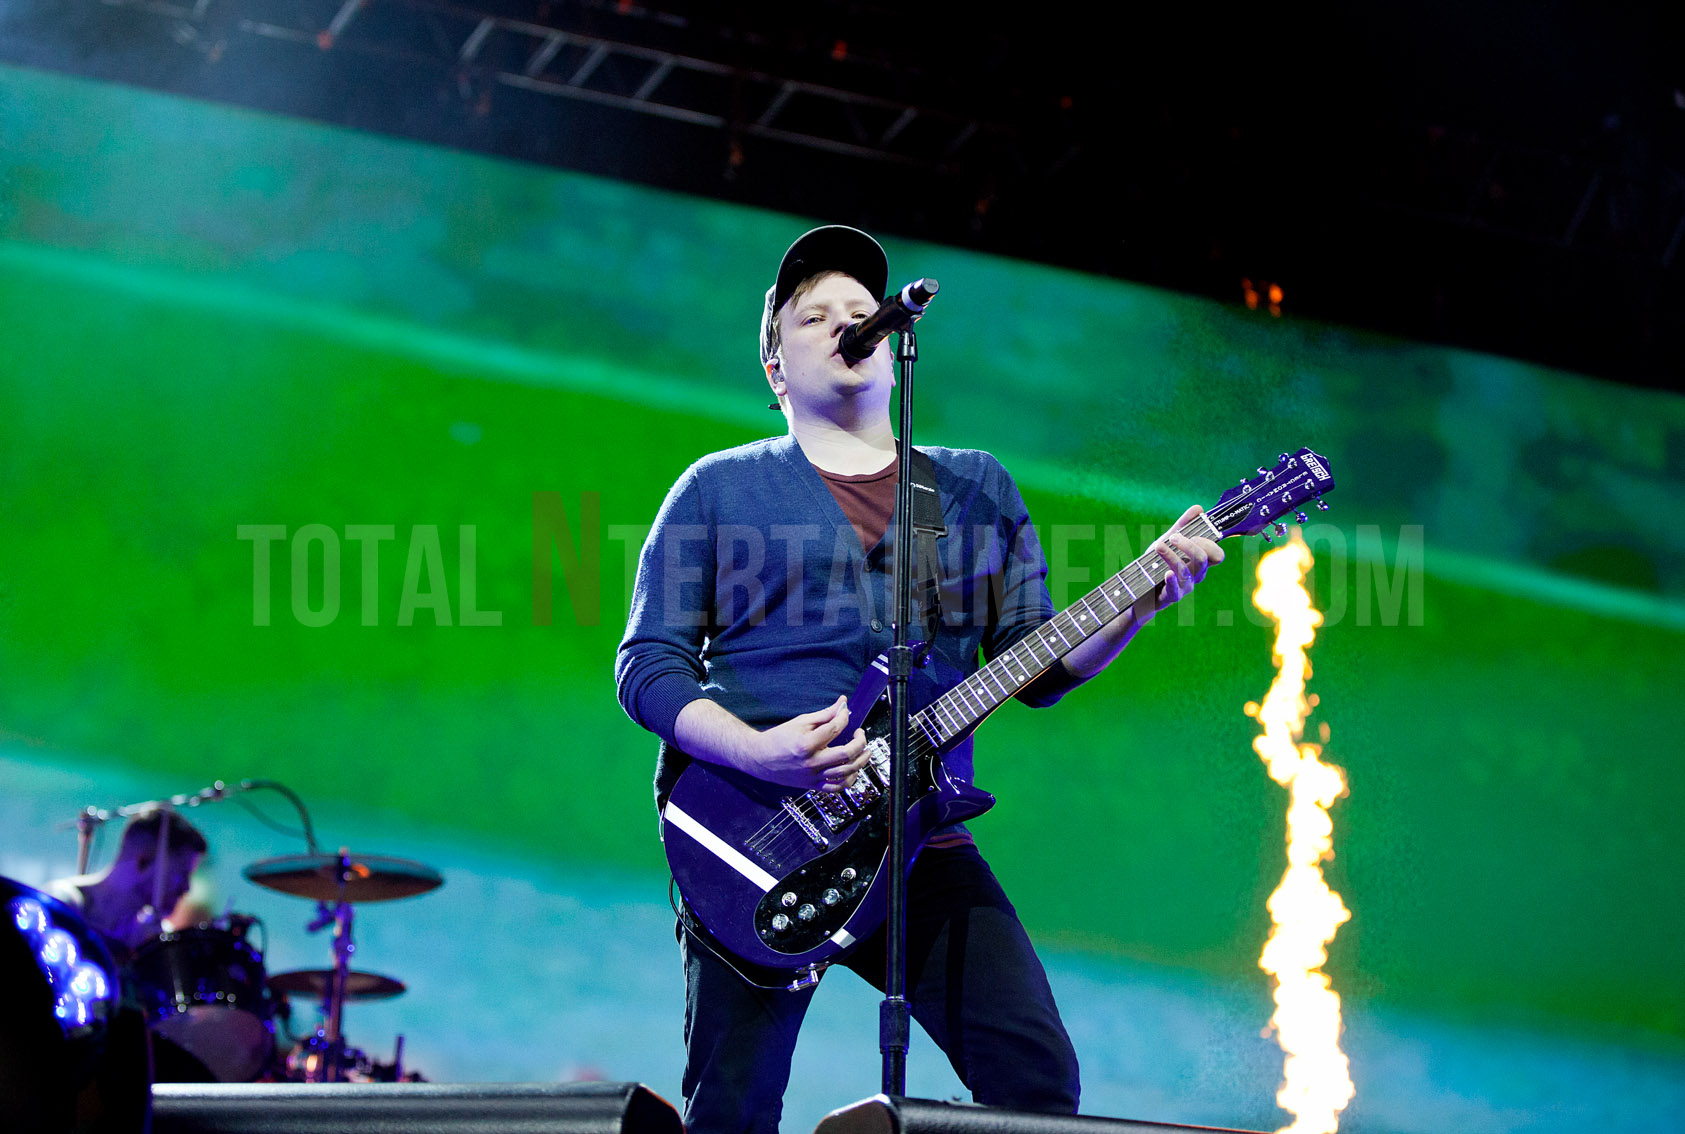 Fall Out Boy, Manchester, Music, totalntertainment, tour